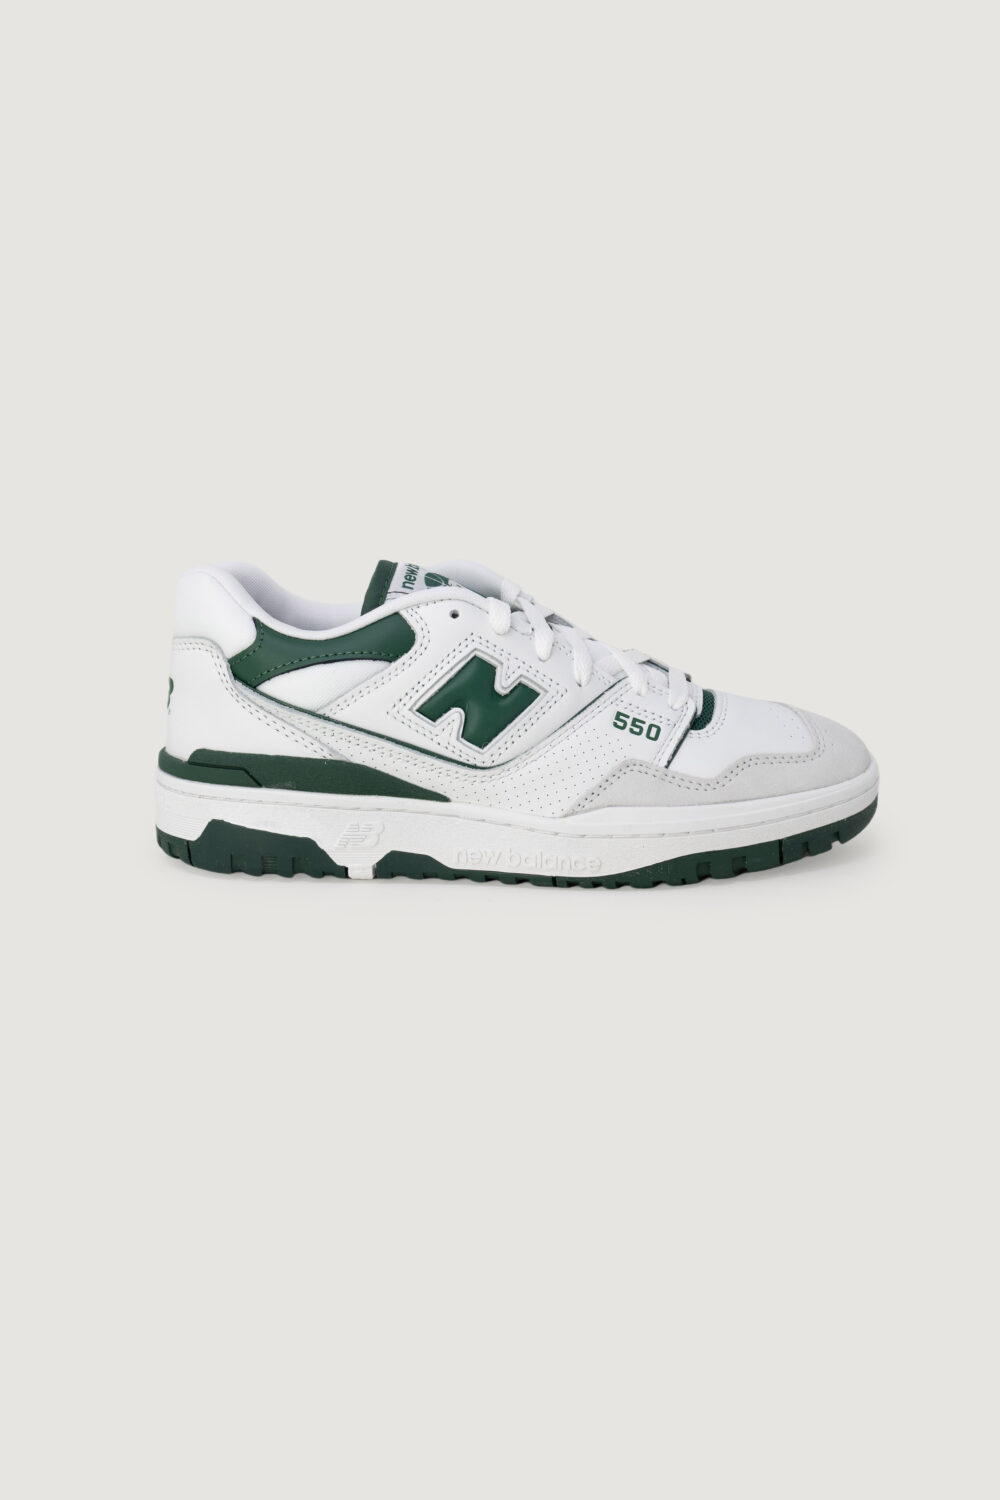 Sneakers New Balance Lifestyle Verde - Foto 1